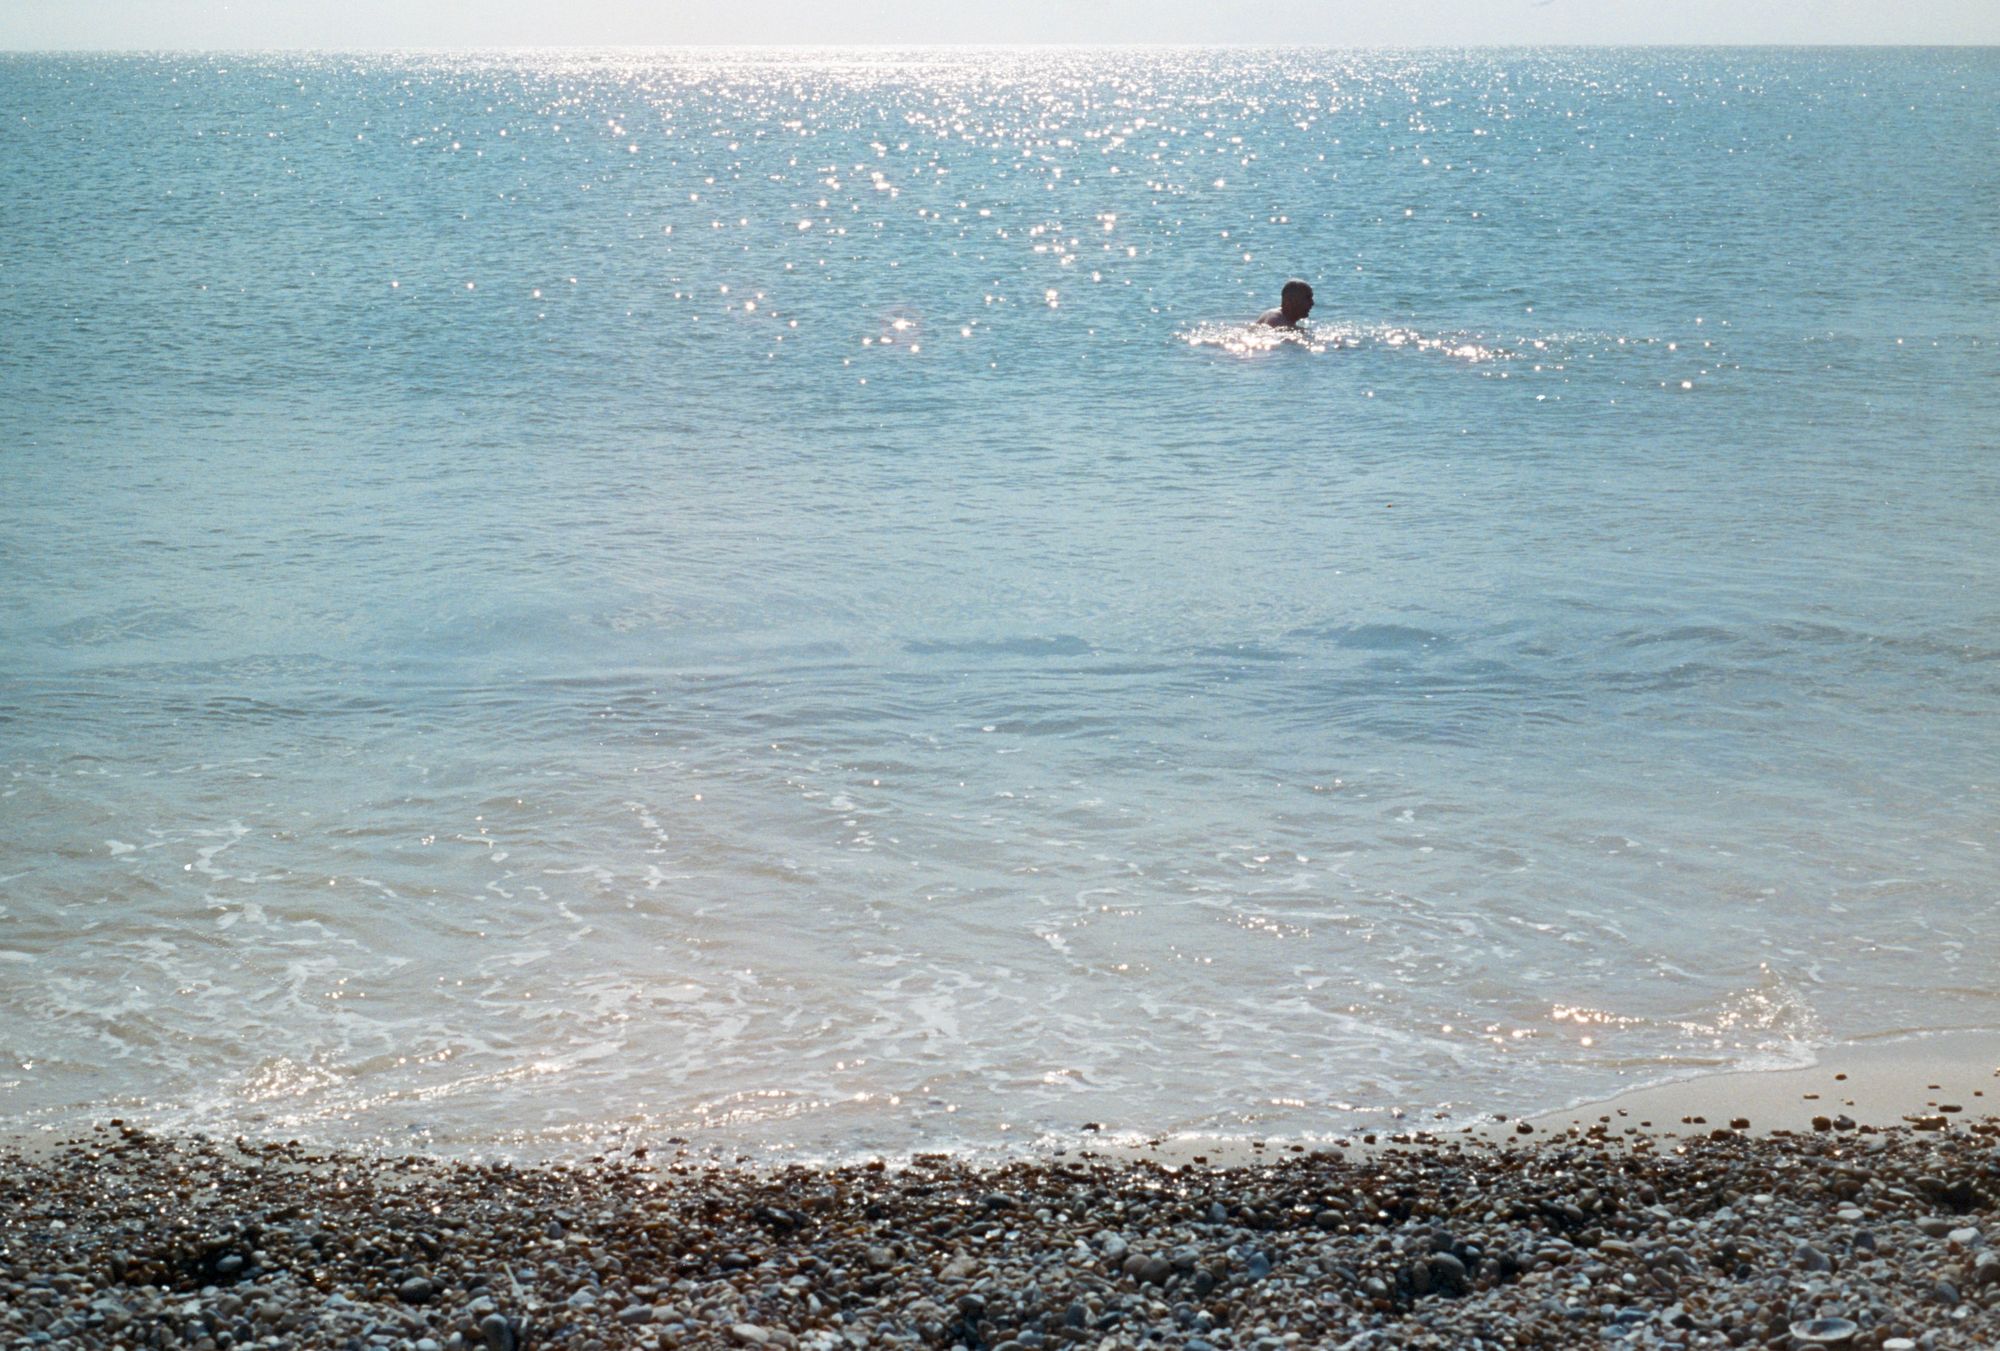 View out to the sparkling North Sea from the shingle Dunwich beach. A man with cropped hair in silhouette swims left to right around 10 metres out to sea.